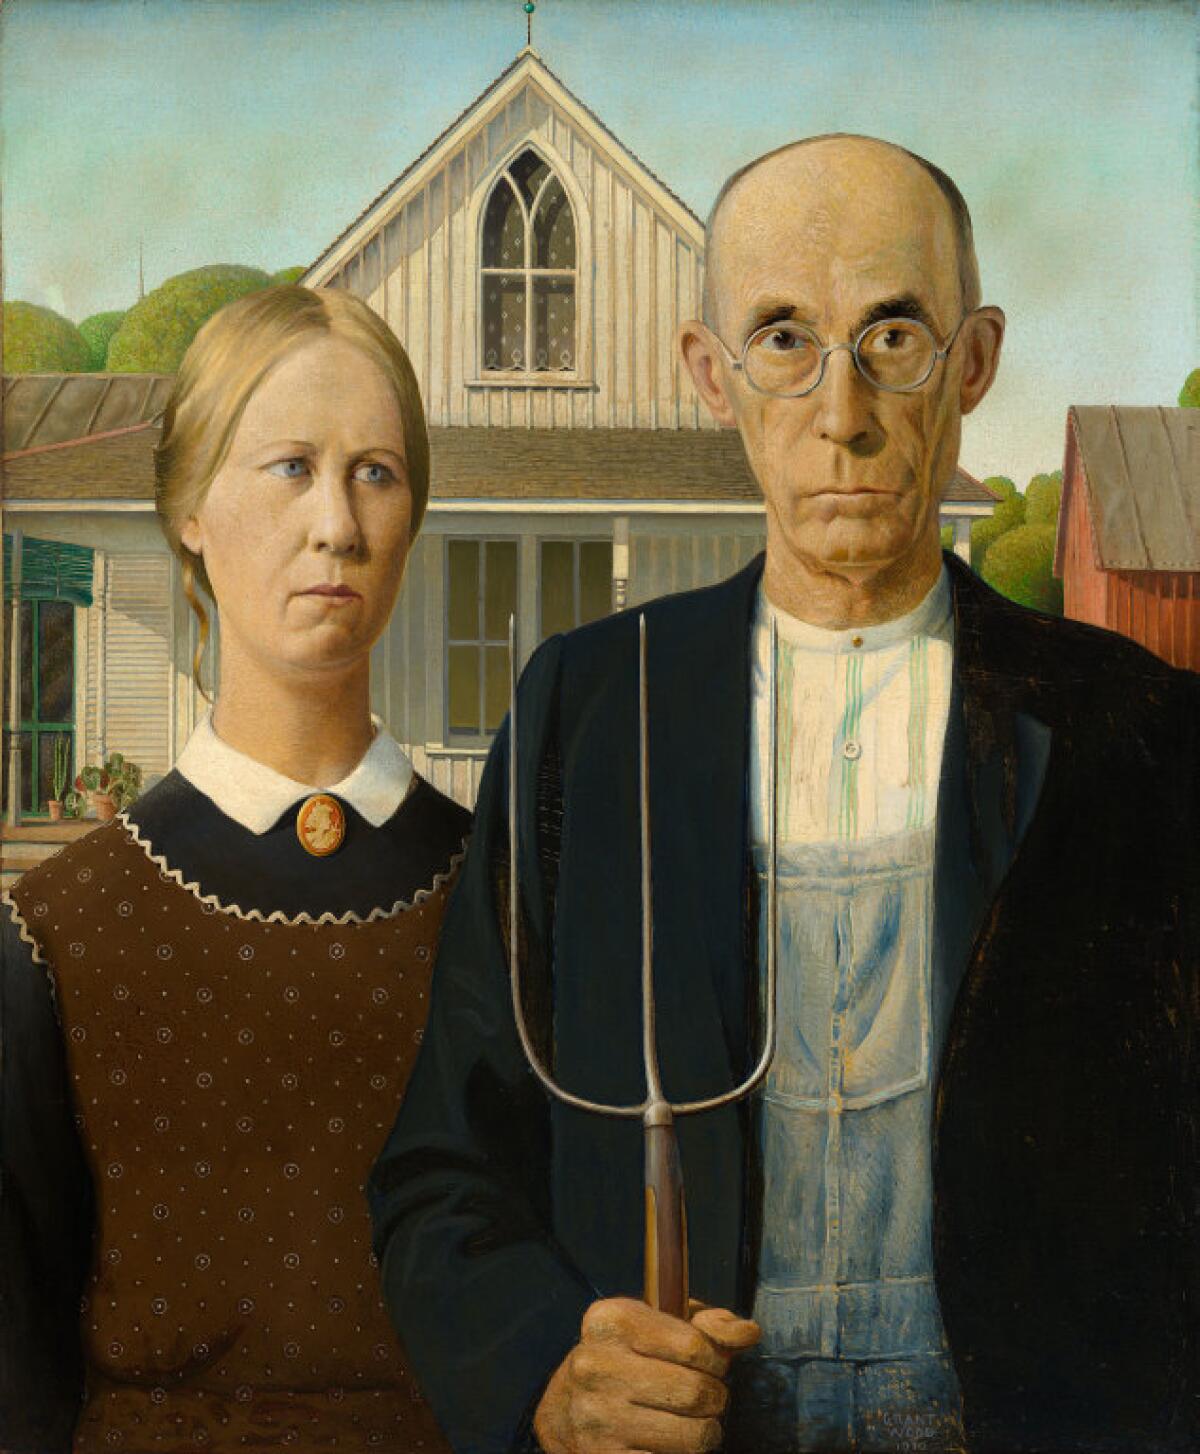 Grant Wood painted "American Gothic" after being intrigued by the building's upstairs window, ordered from a Sears catalog.